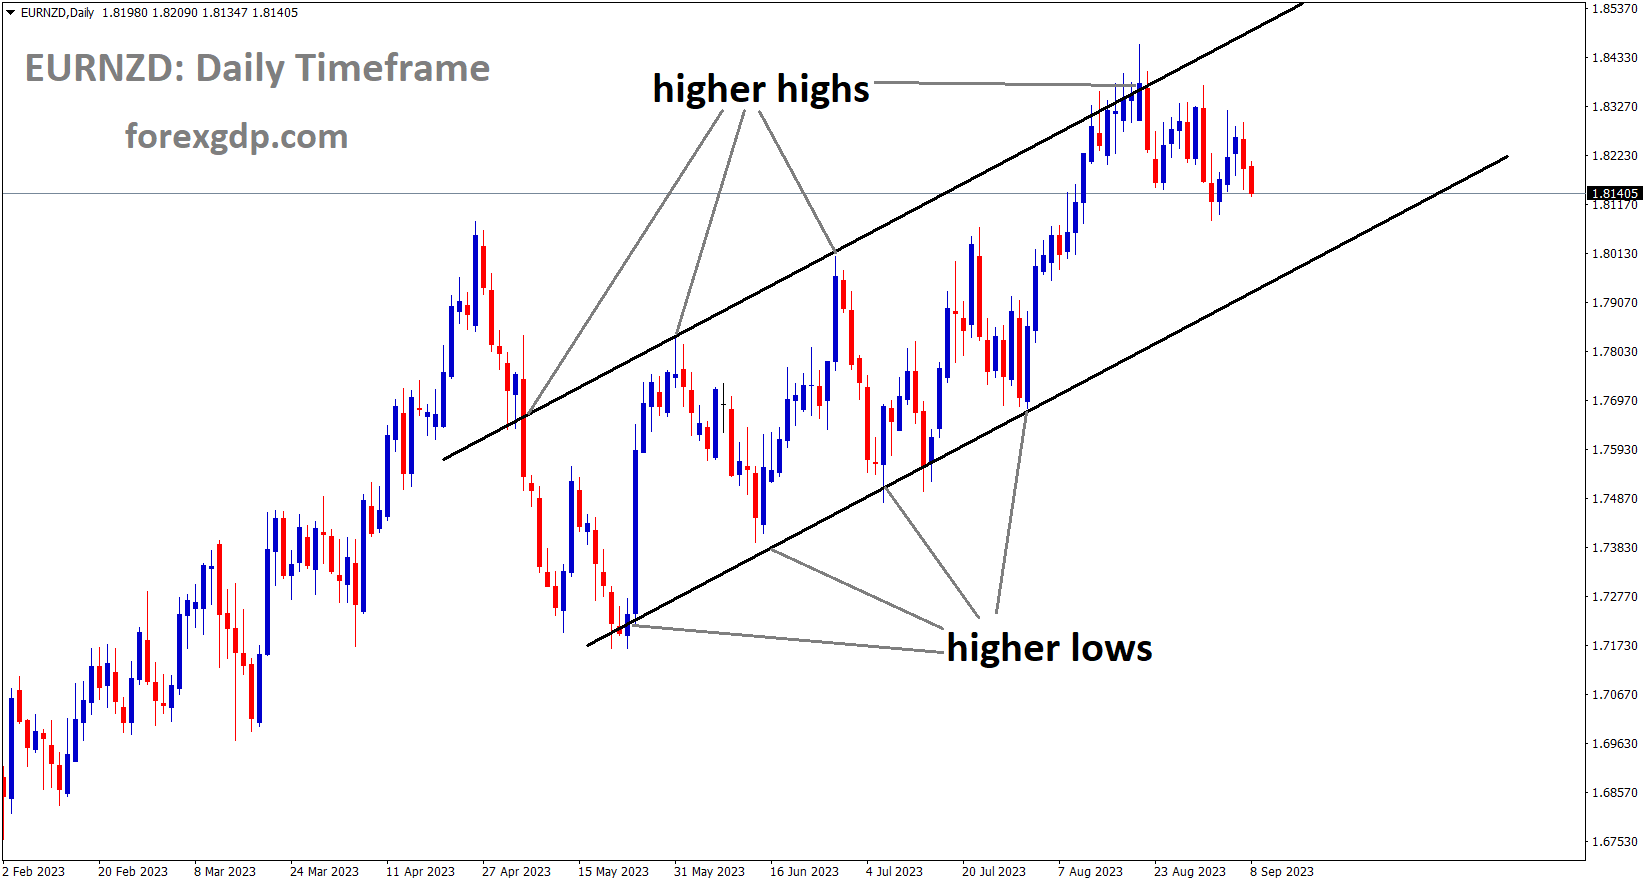 EURNZD is moving in an Ascending channel and the market has fallen from the higher high area of the channel